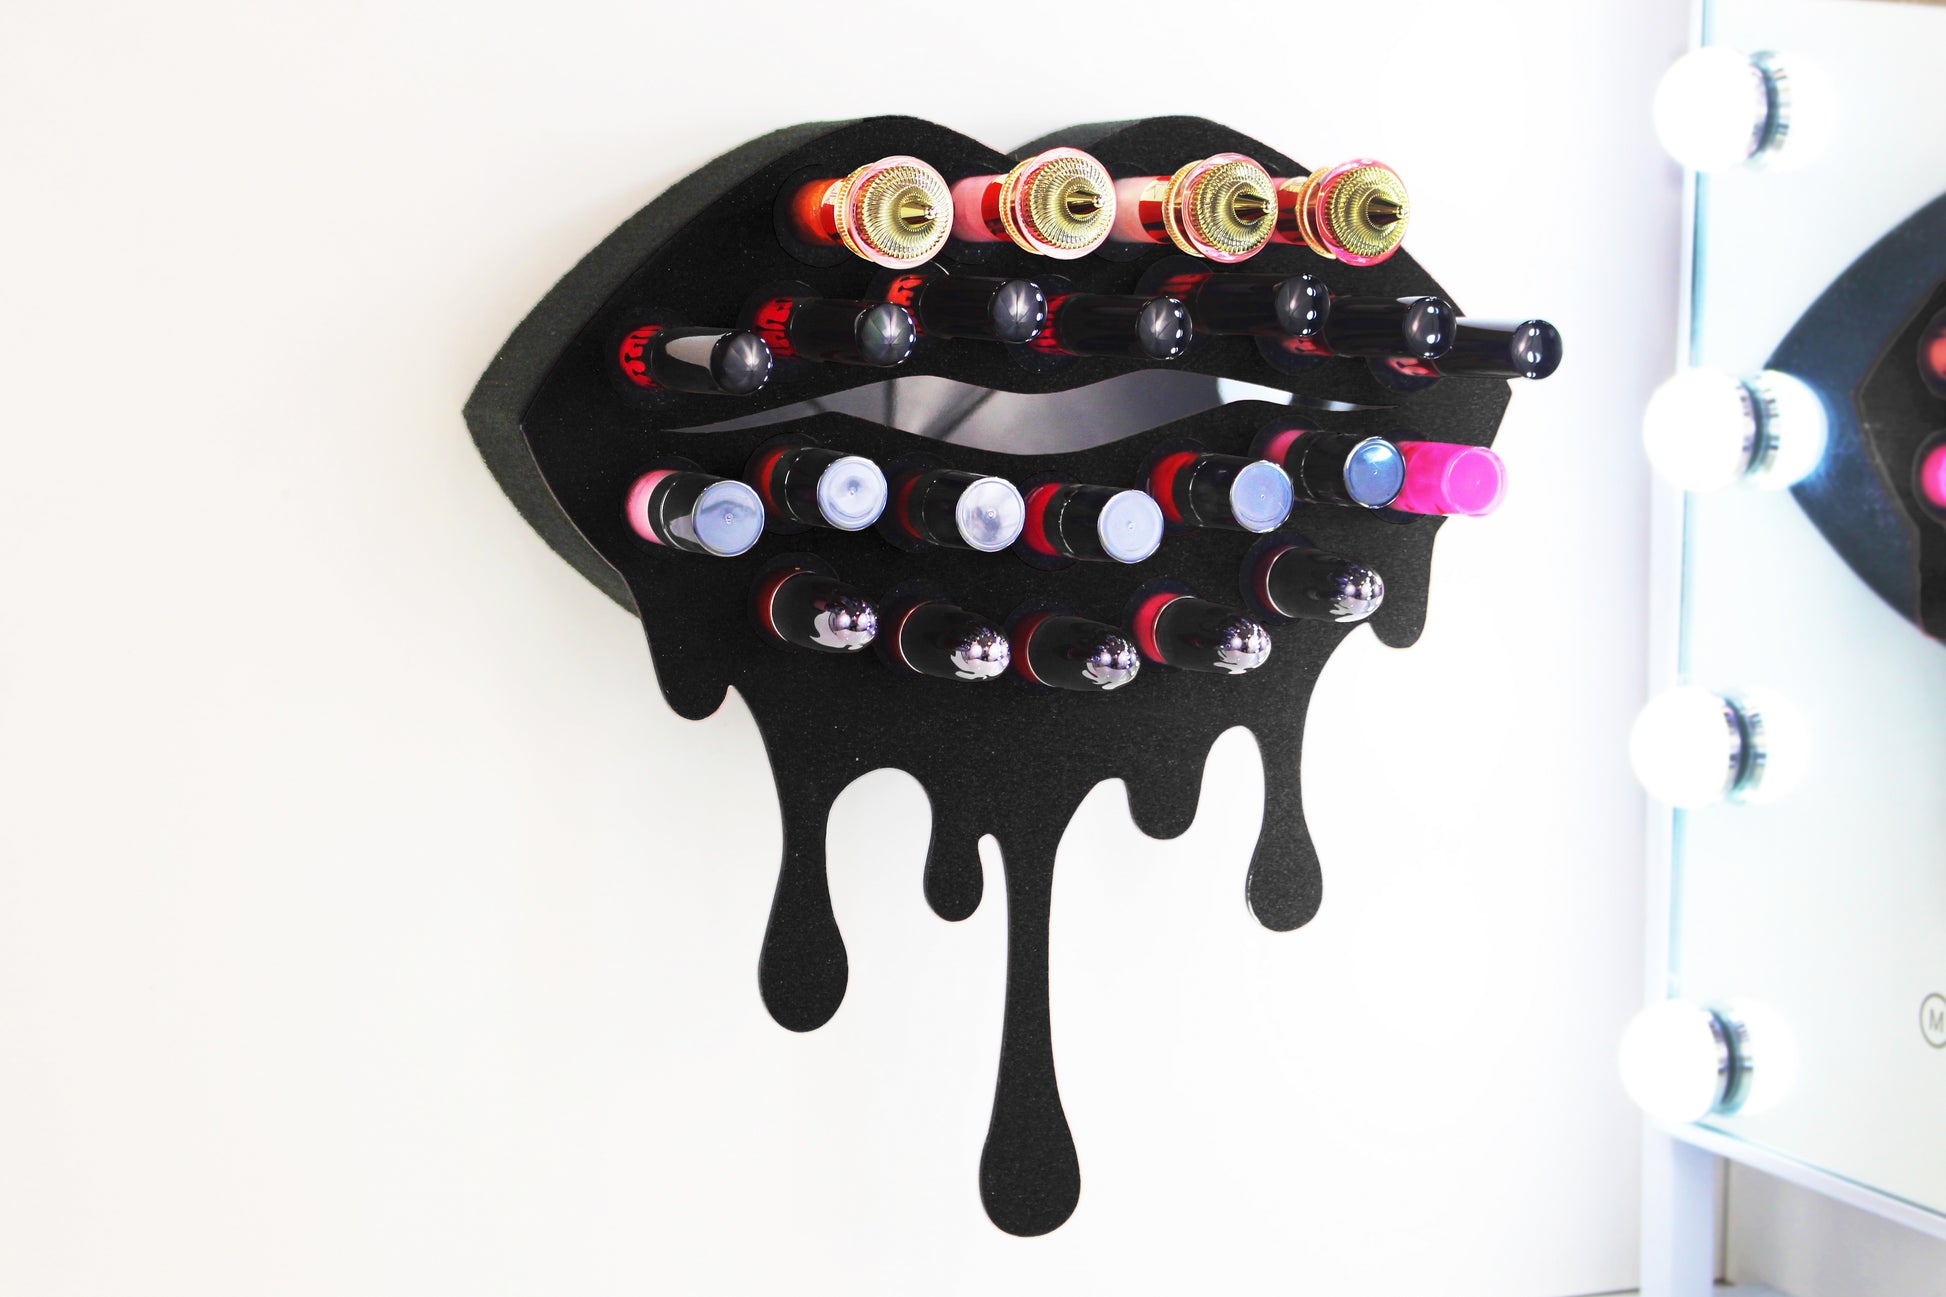 Black Medium Lip Design Lipstick Organizer holding 23 lipsticks mounted on the wall, keeping lipstick organized and easy to reach. This wall mounted makeup organizer looks like art on the wall of your bathroom or makeup room.